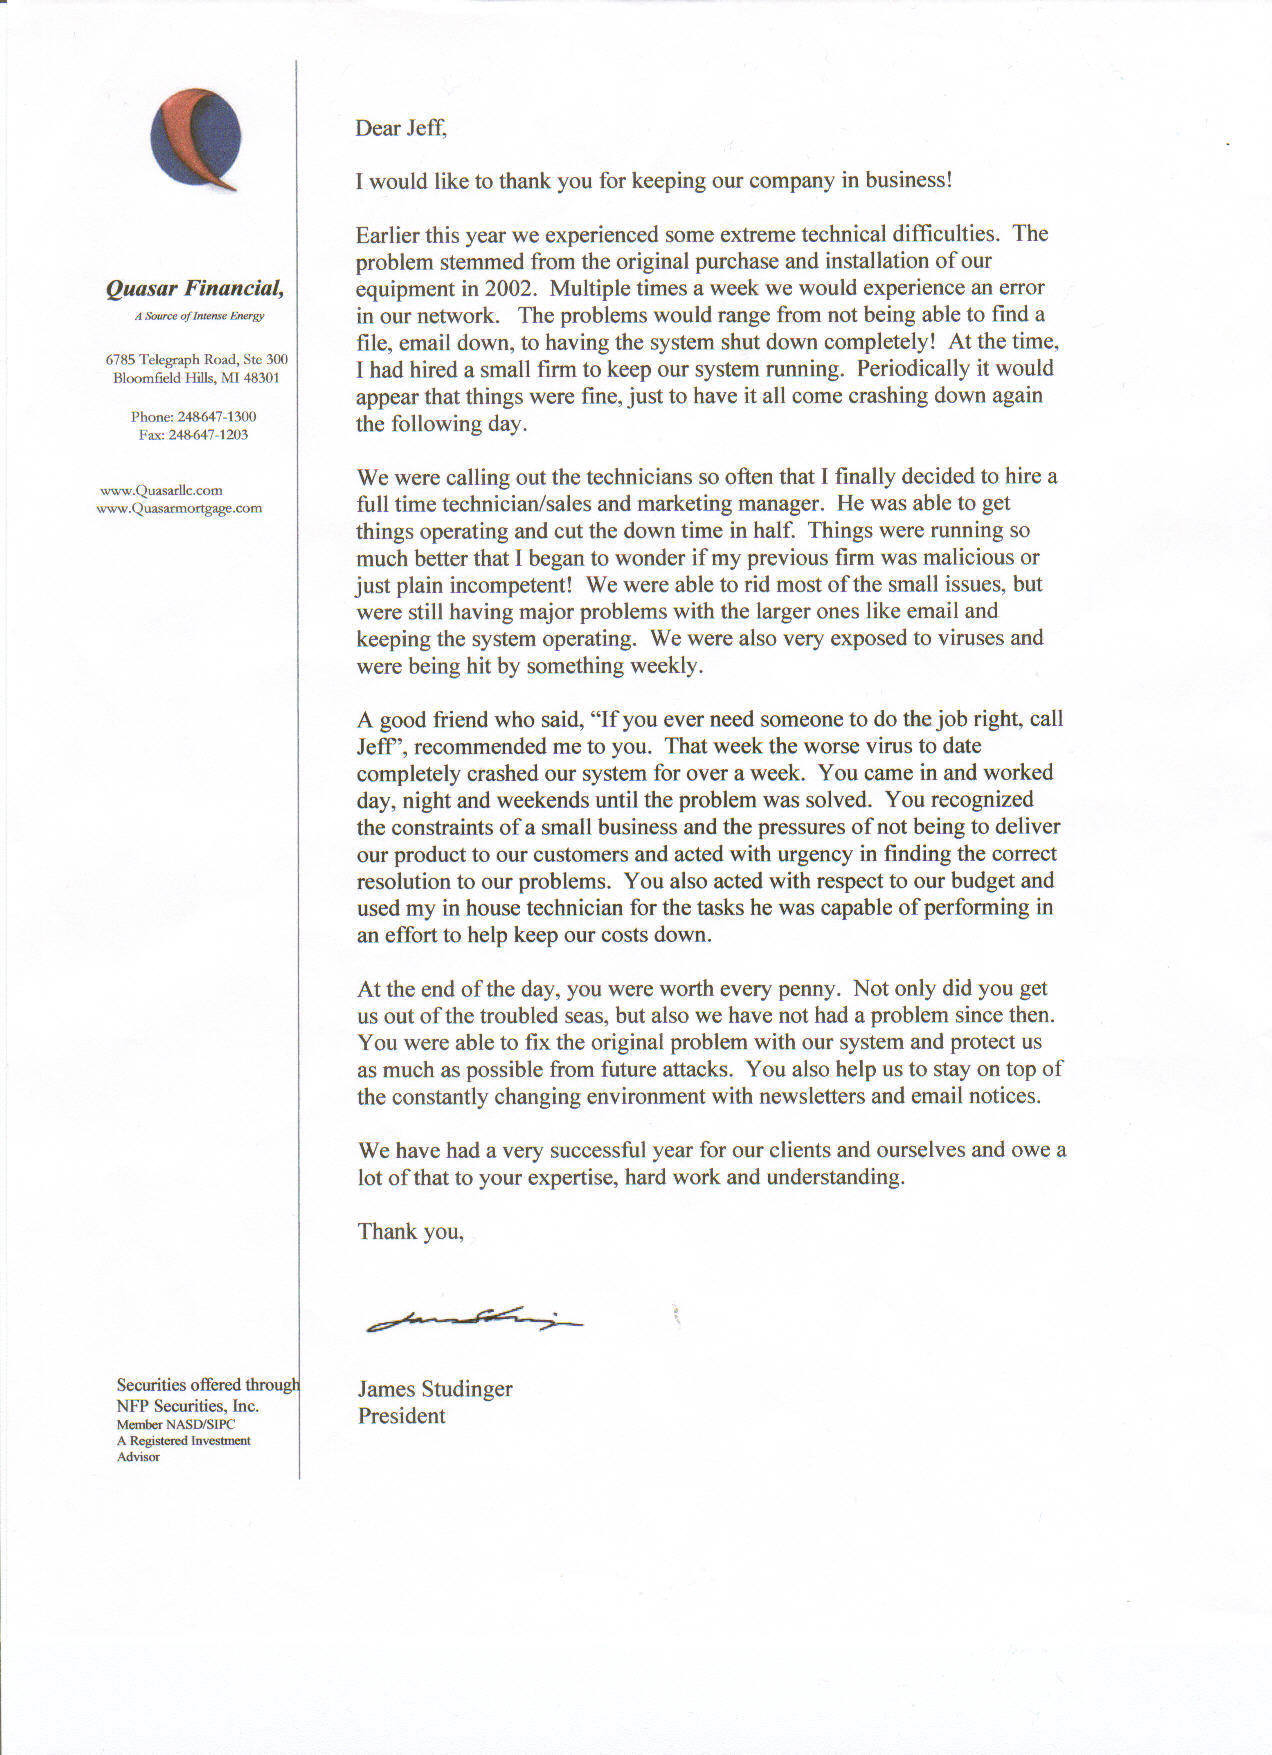  letter of recoomendation from Qausar Financial